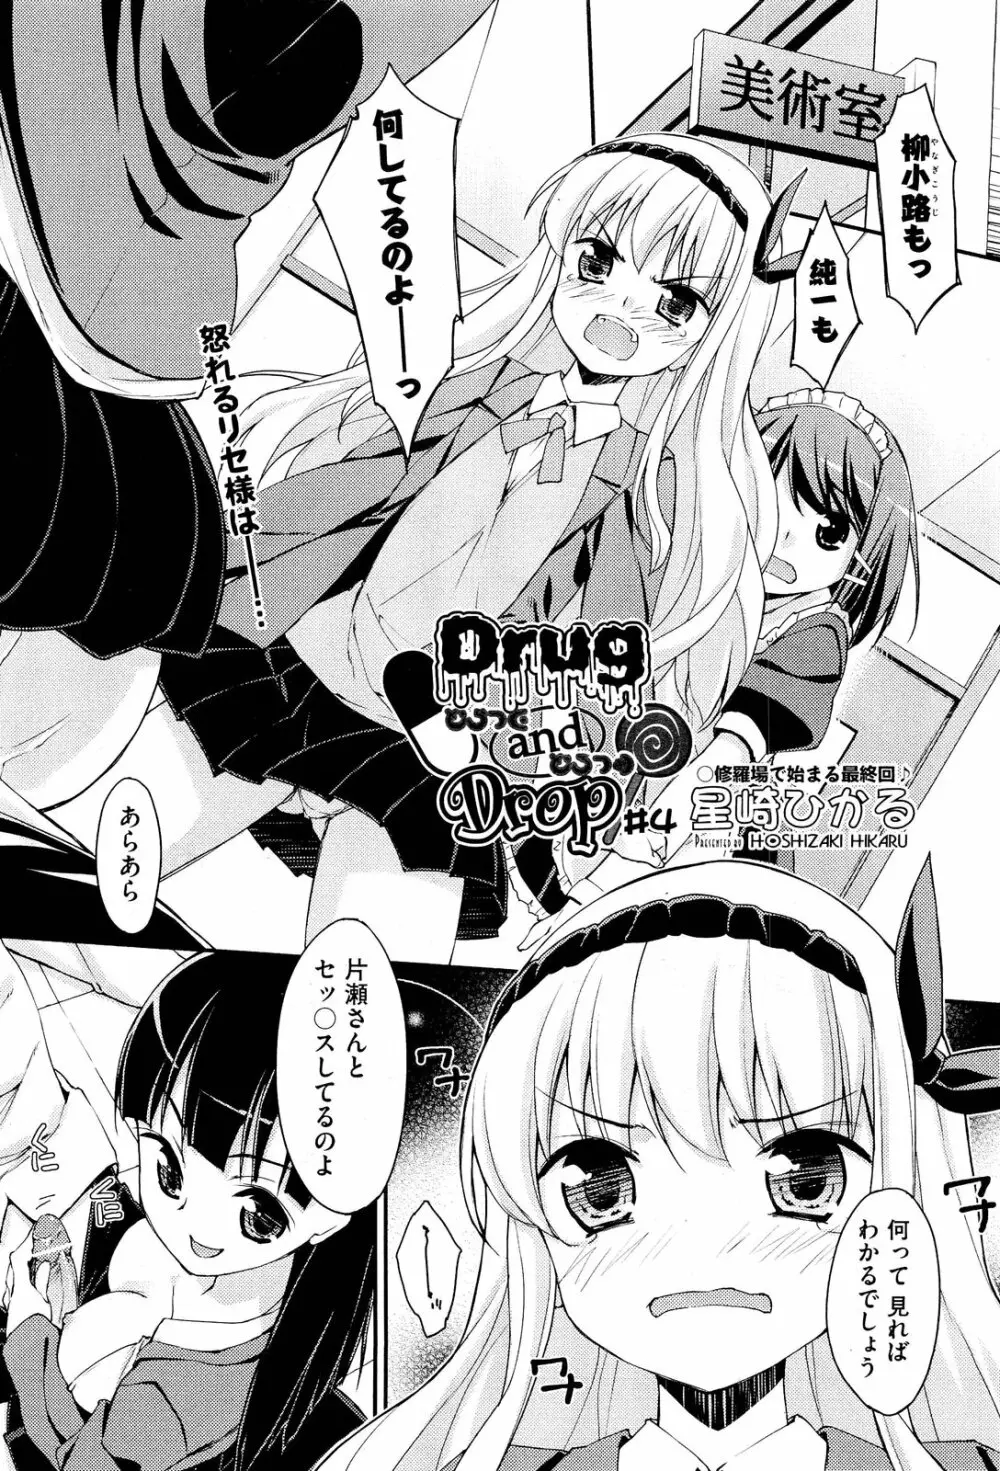 Drug and Drop 第1-4話 59ページ